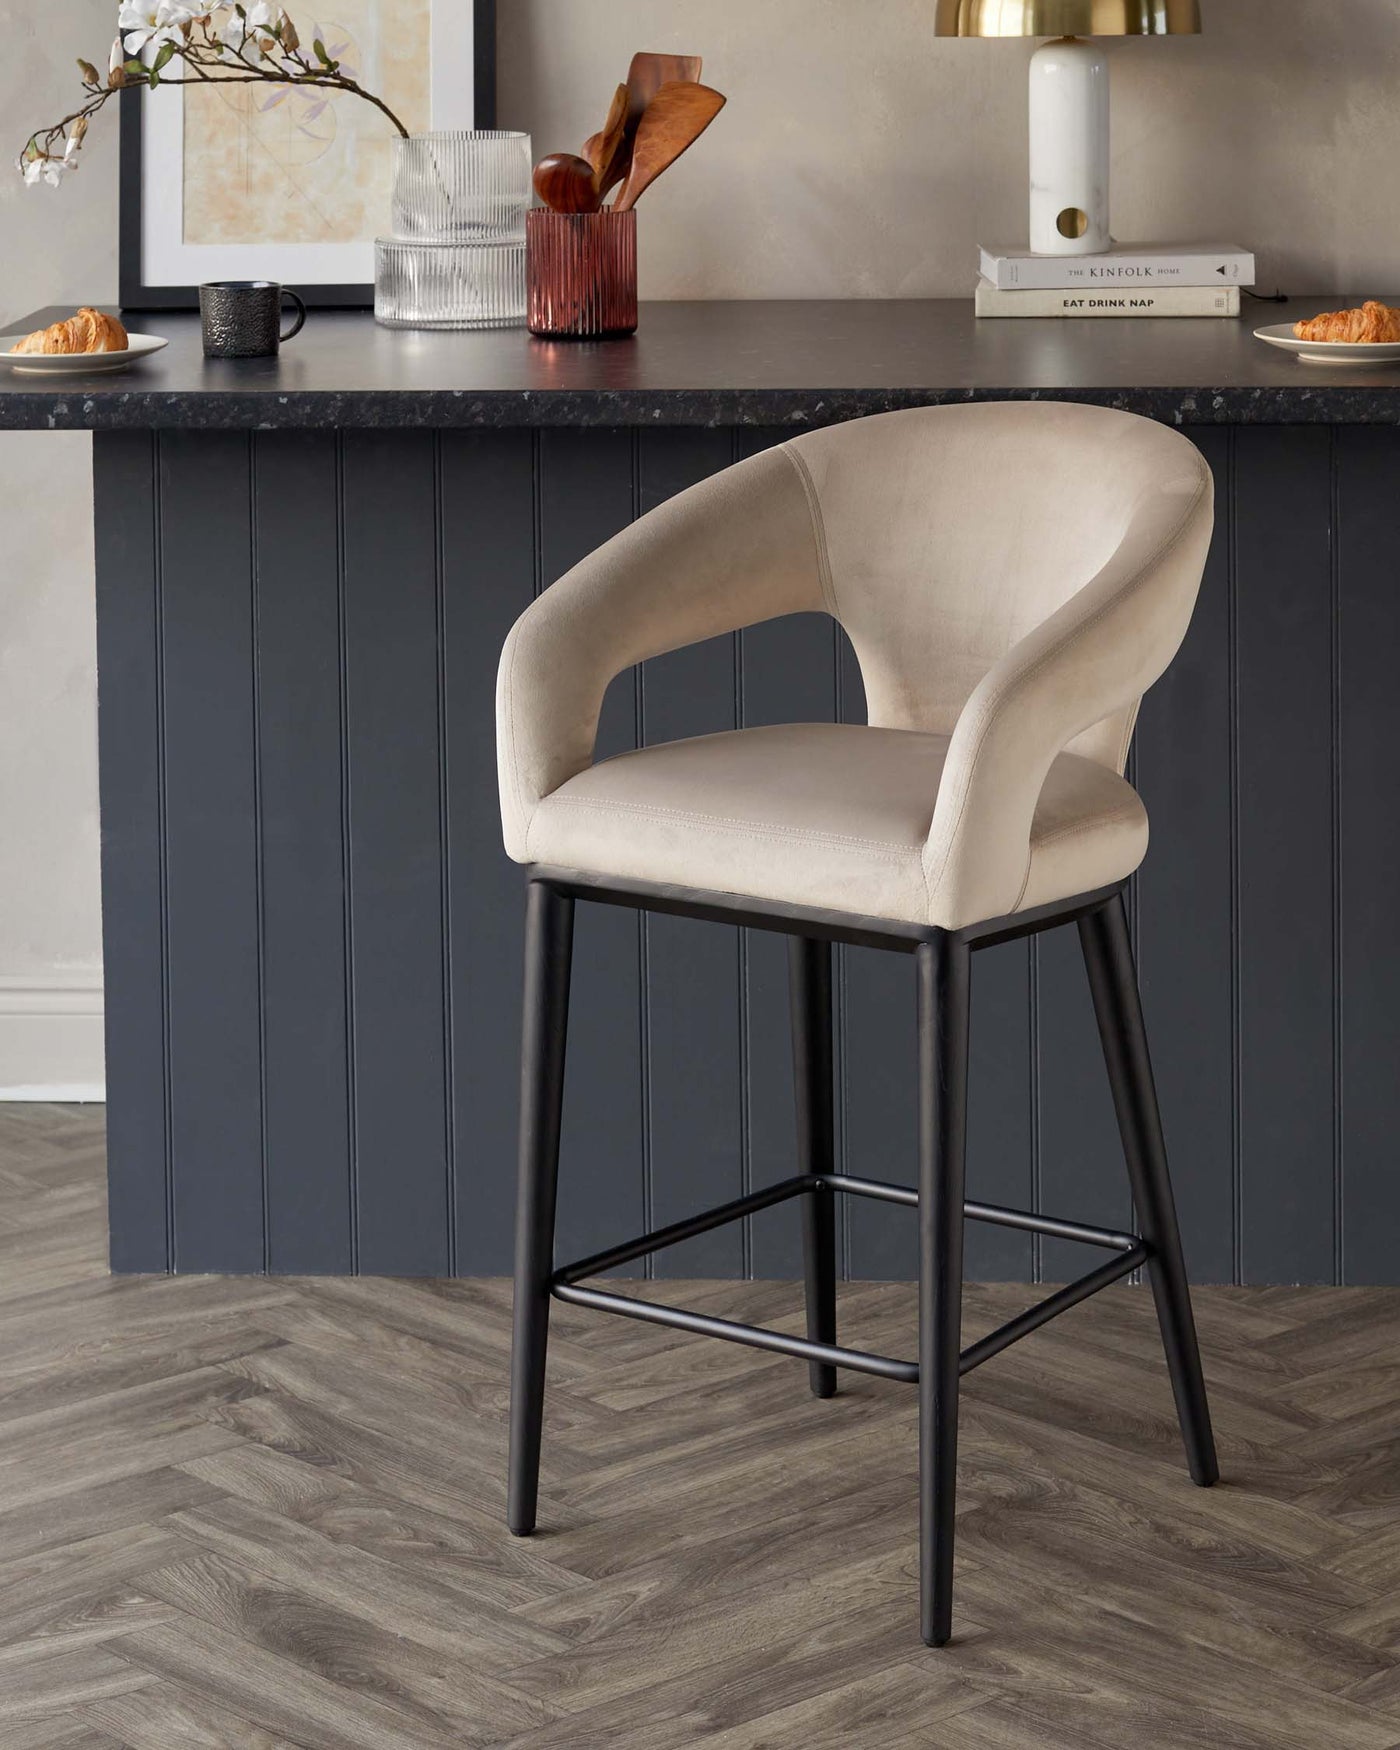 Elegant modern bar stool with a curved backrest and plush beige upholstery, featuring a sleek black metal frame with four legs and a footrest.